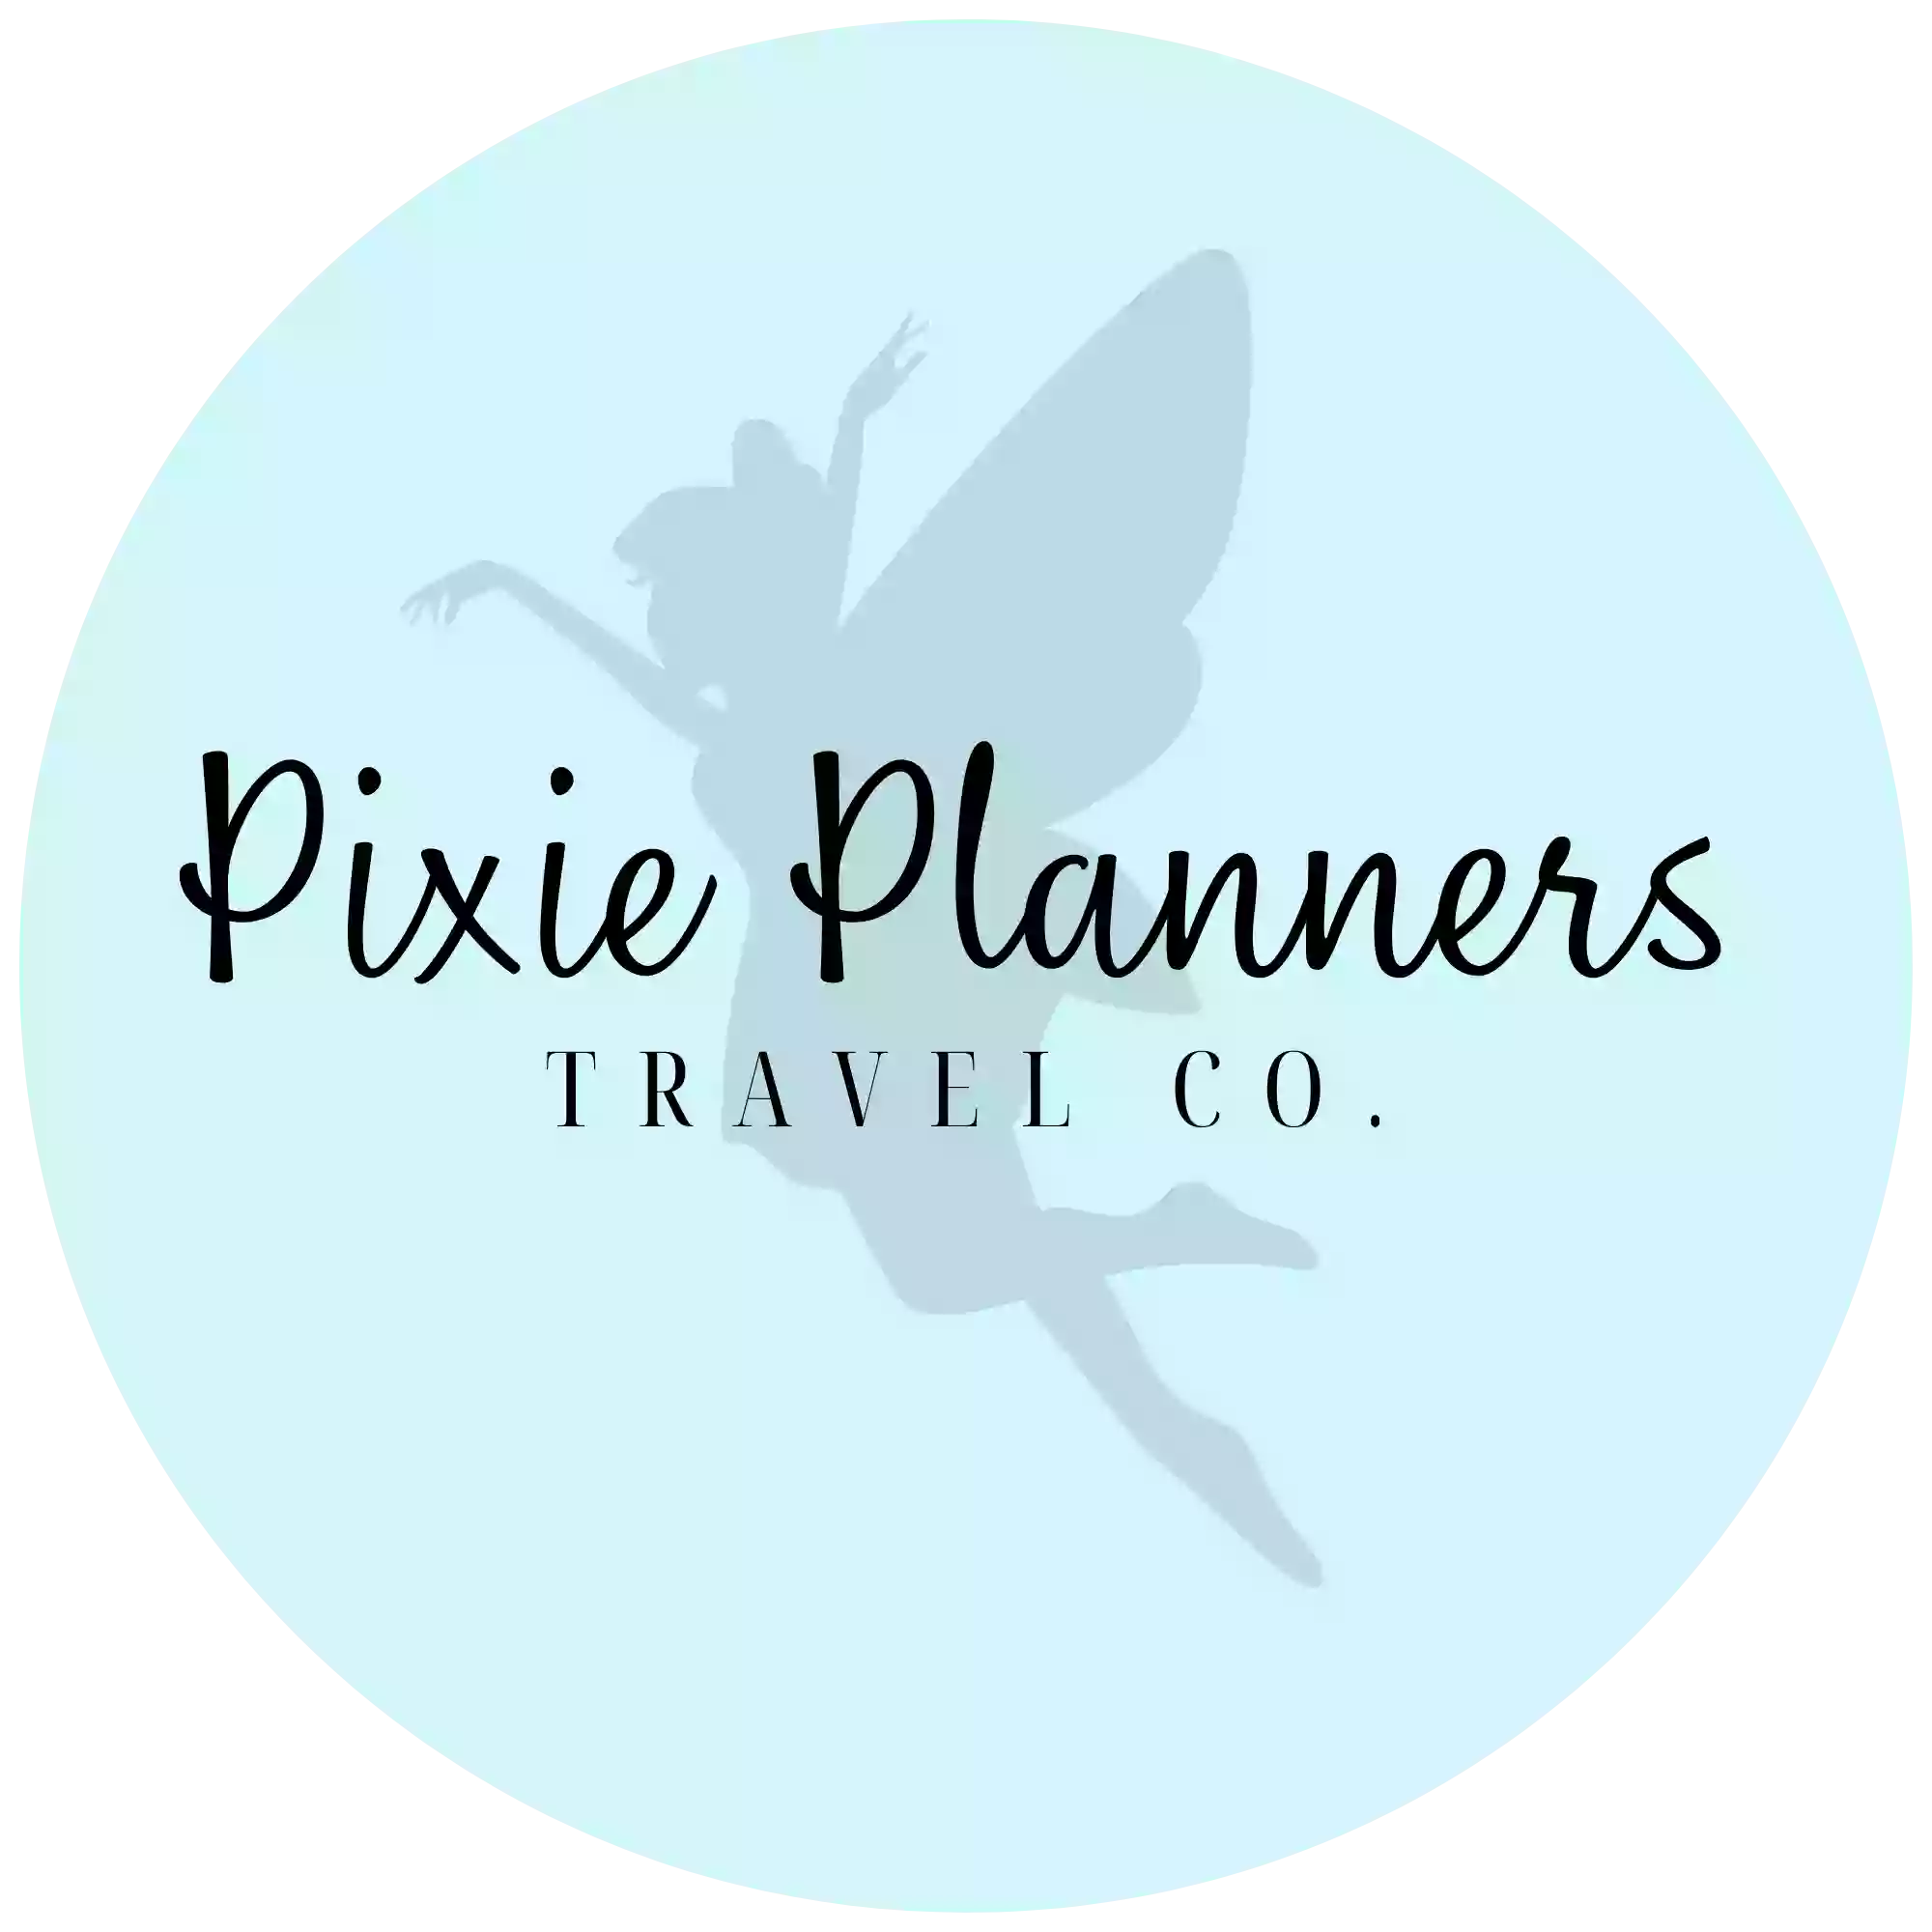 Pixie Planners Travel Co.